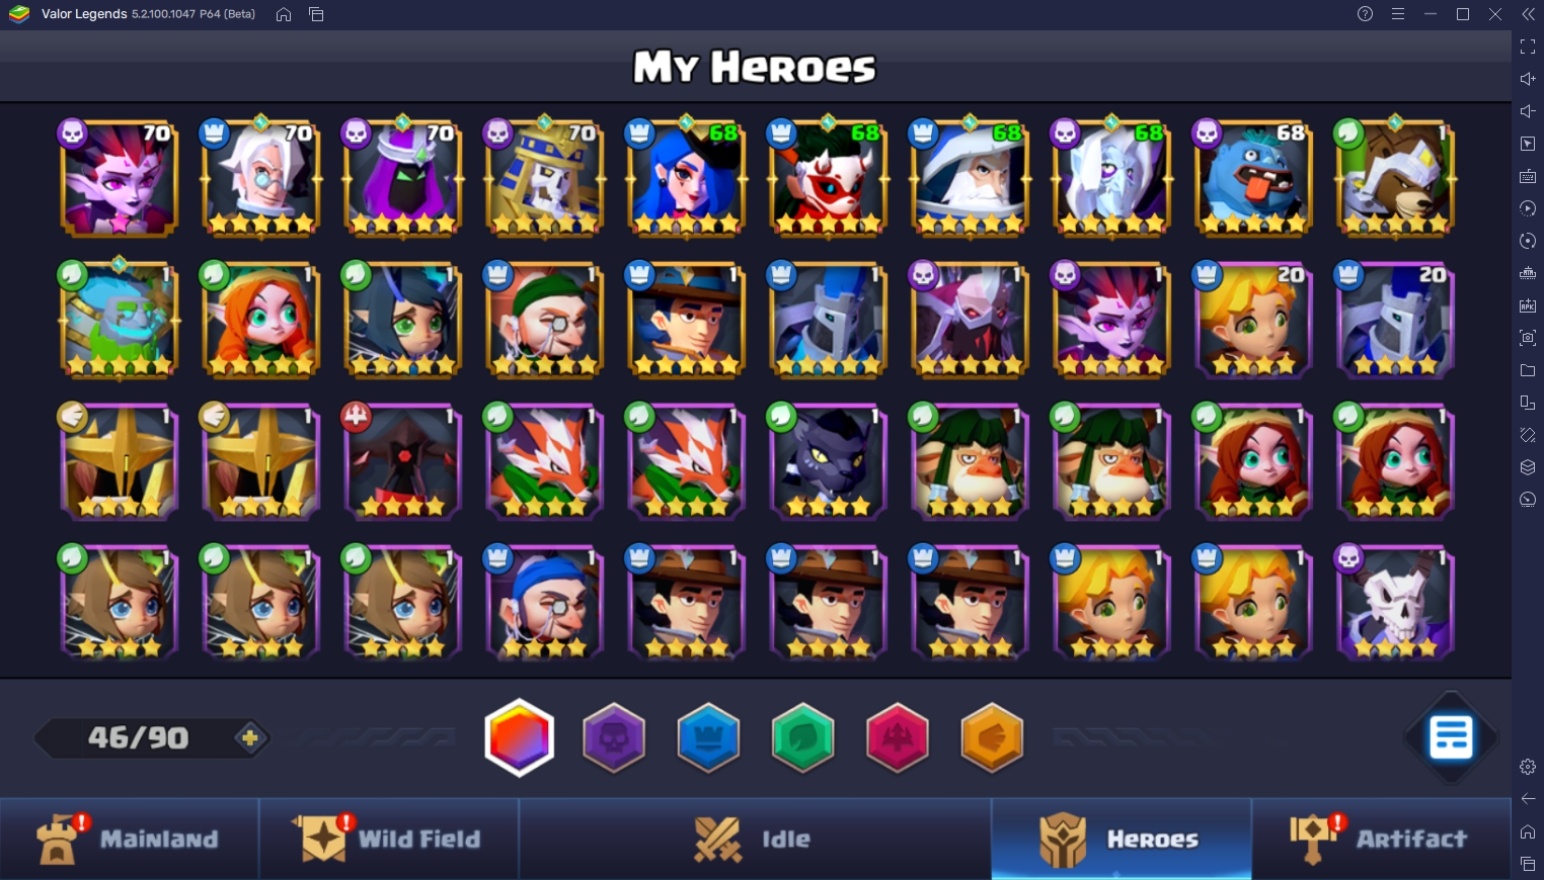 BlueStacks' Beginners Guide to Playing Valor Legends: Eternity